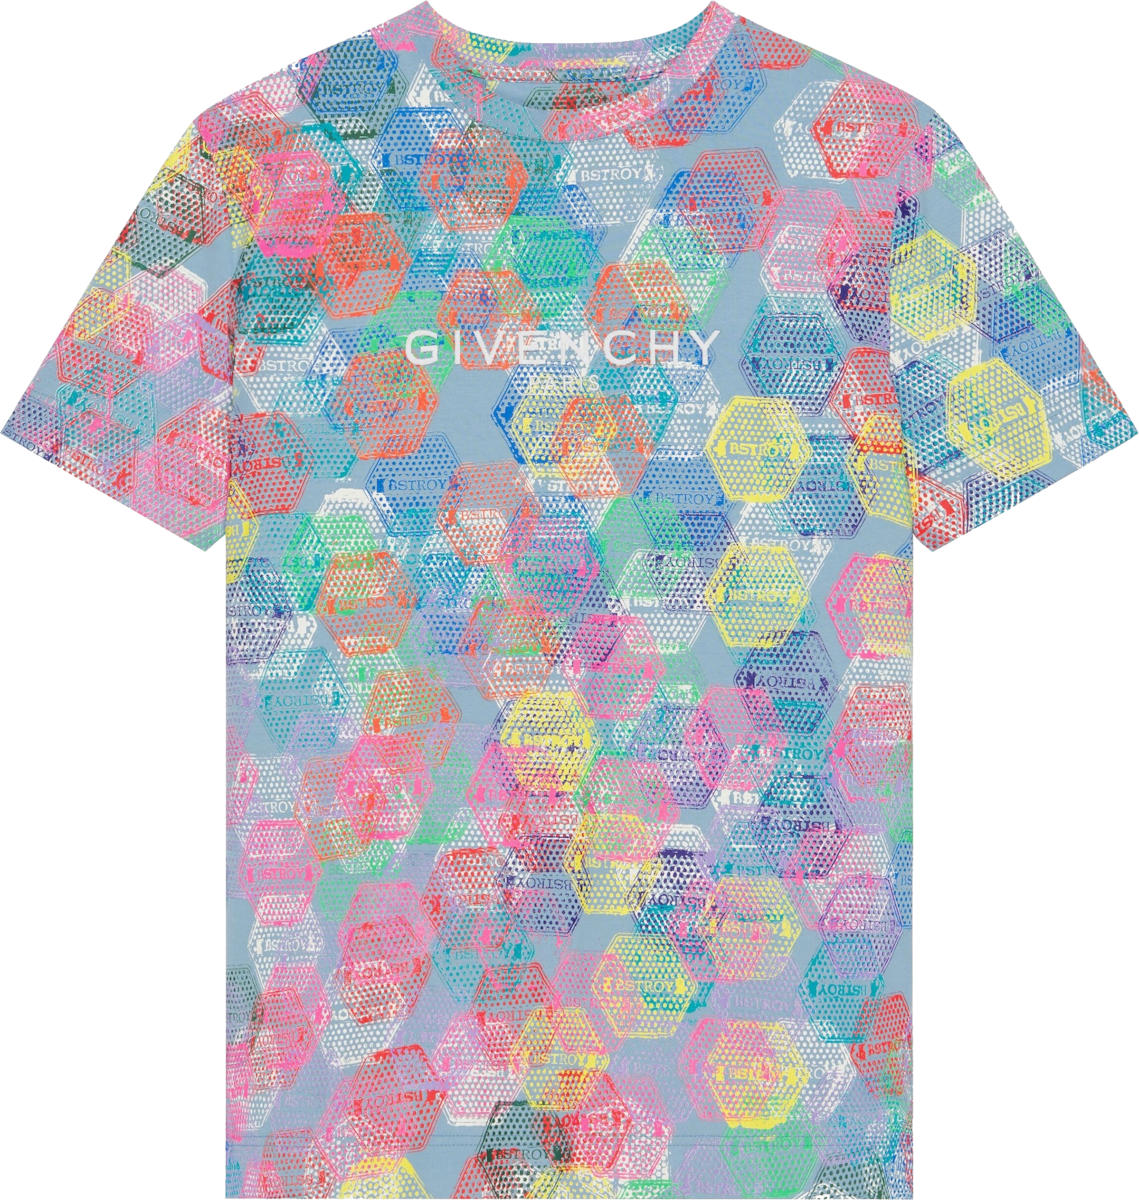 Givenchy x BSTROY Multicolor Stamp Print T-Shirt | INC STYLE